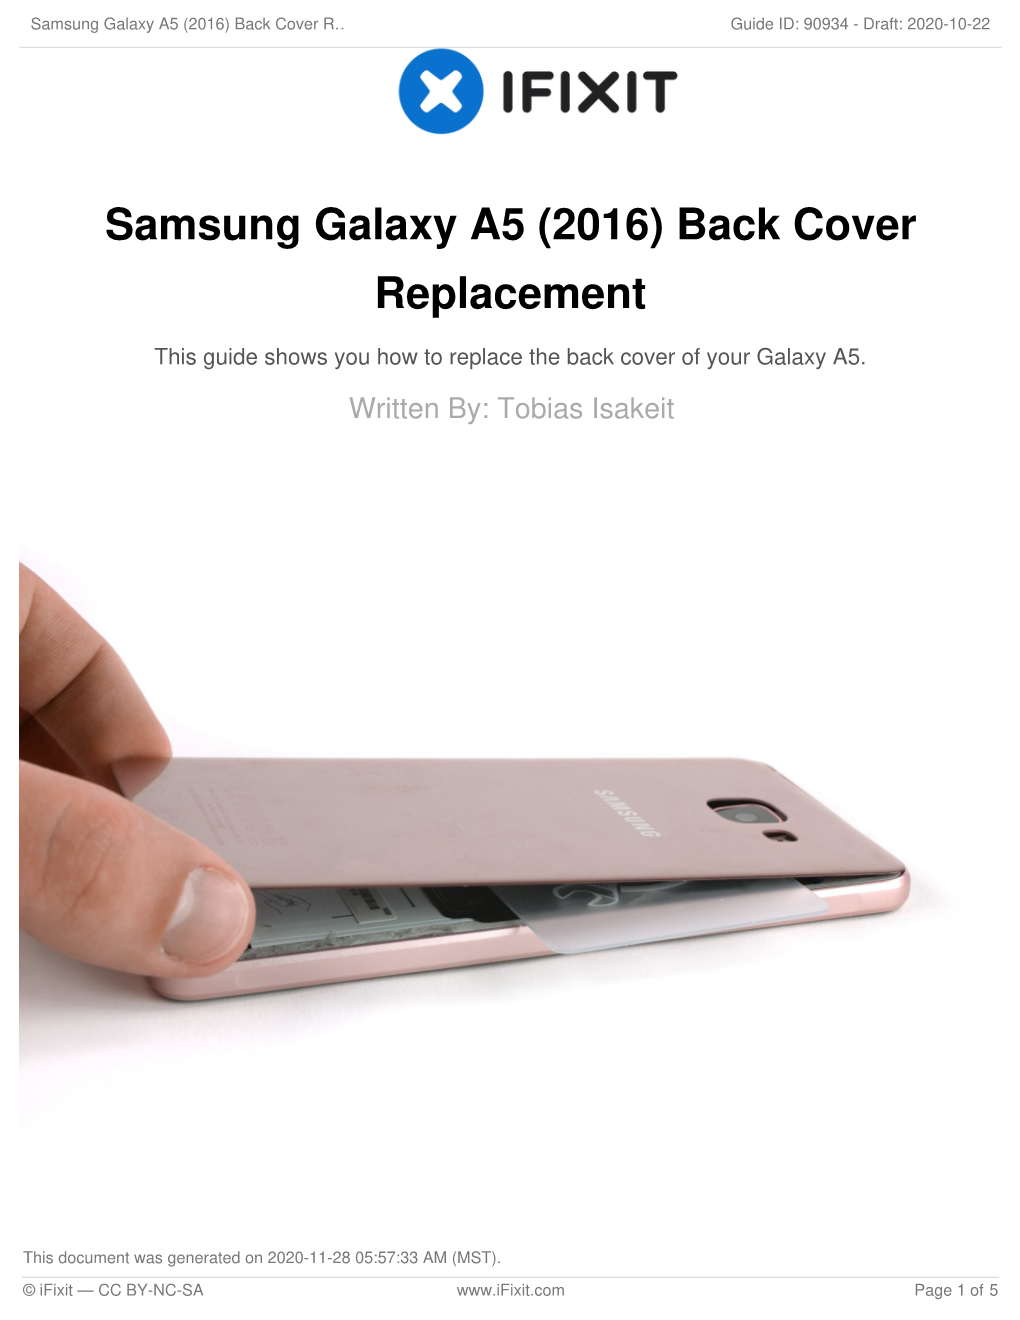 Samsung Galaxy A5 (2016) Back Cover Replacement